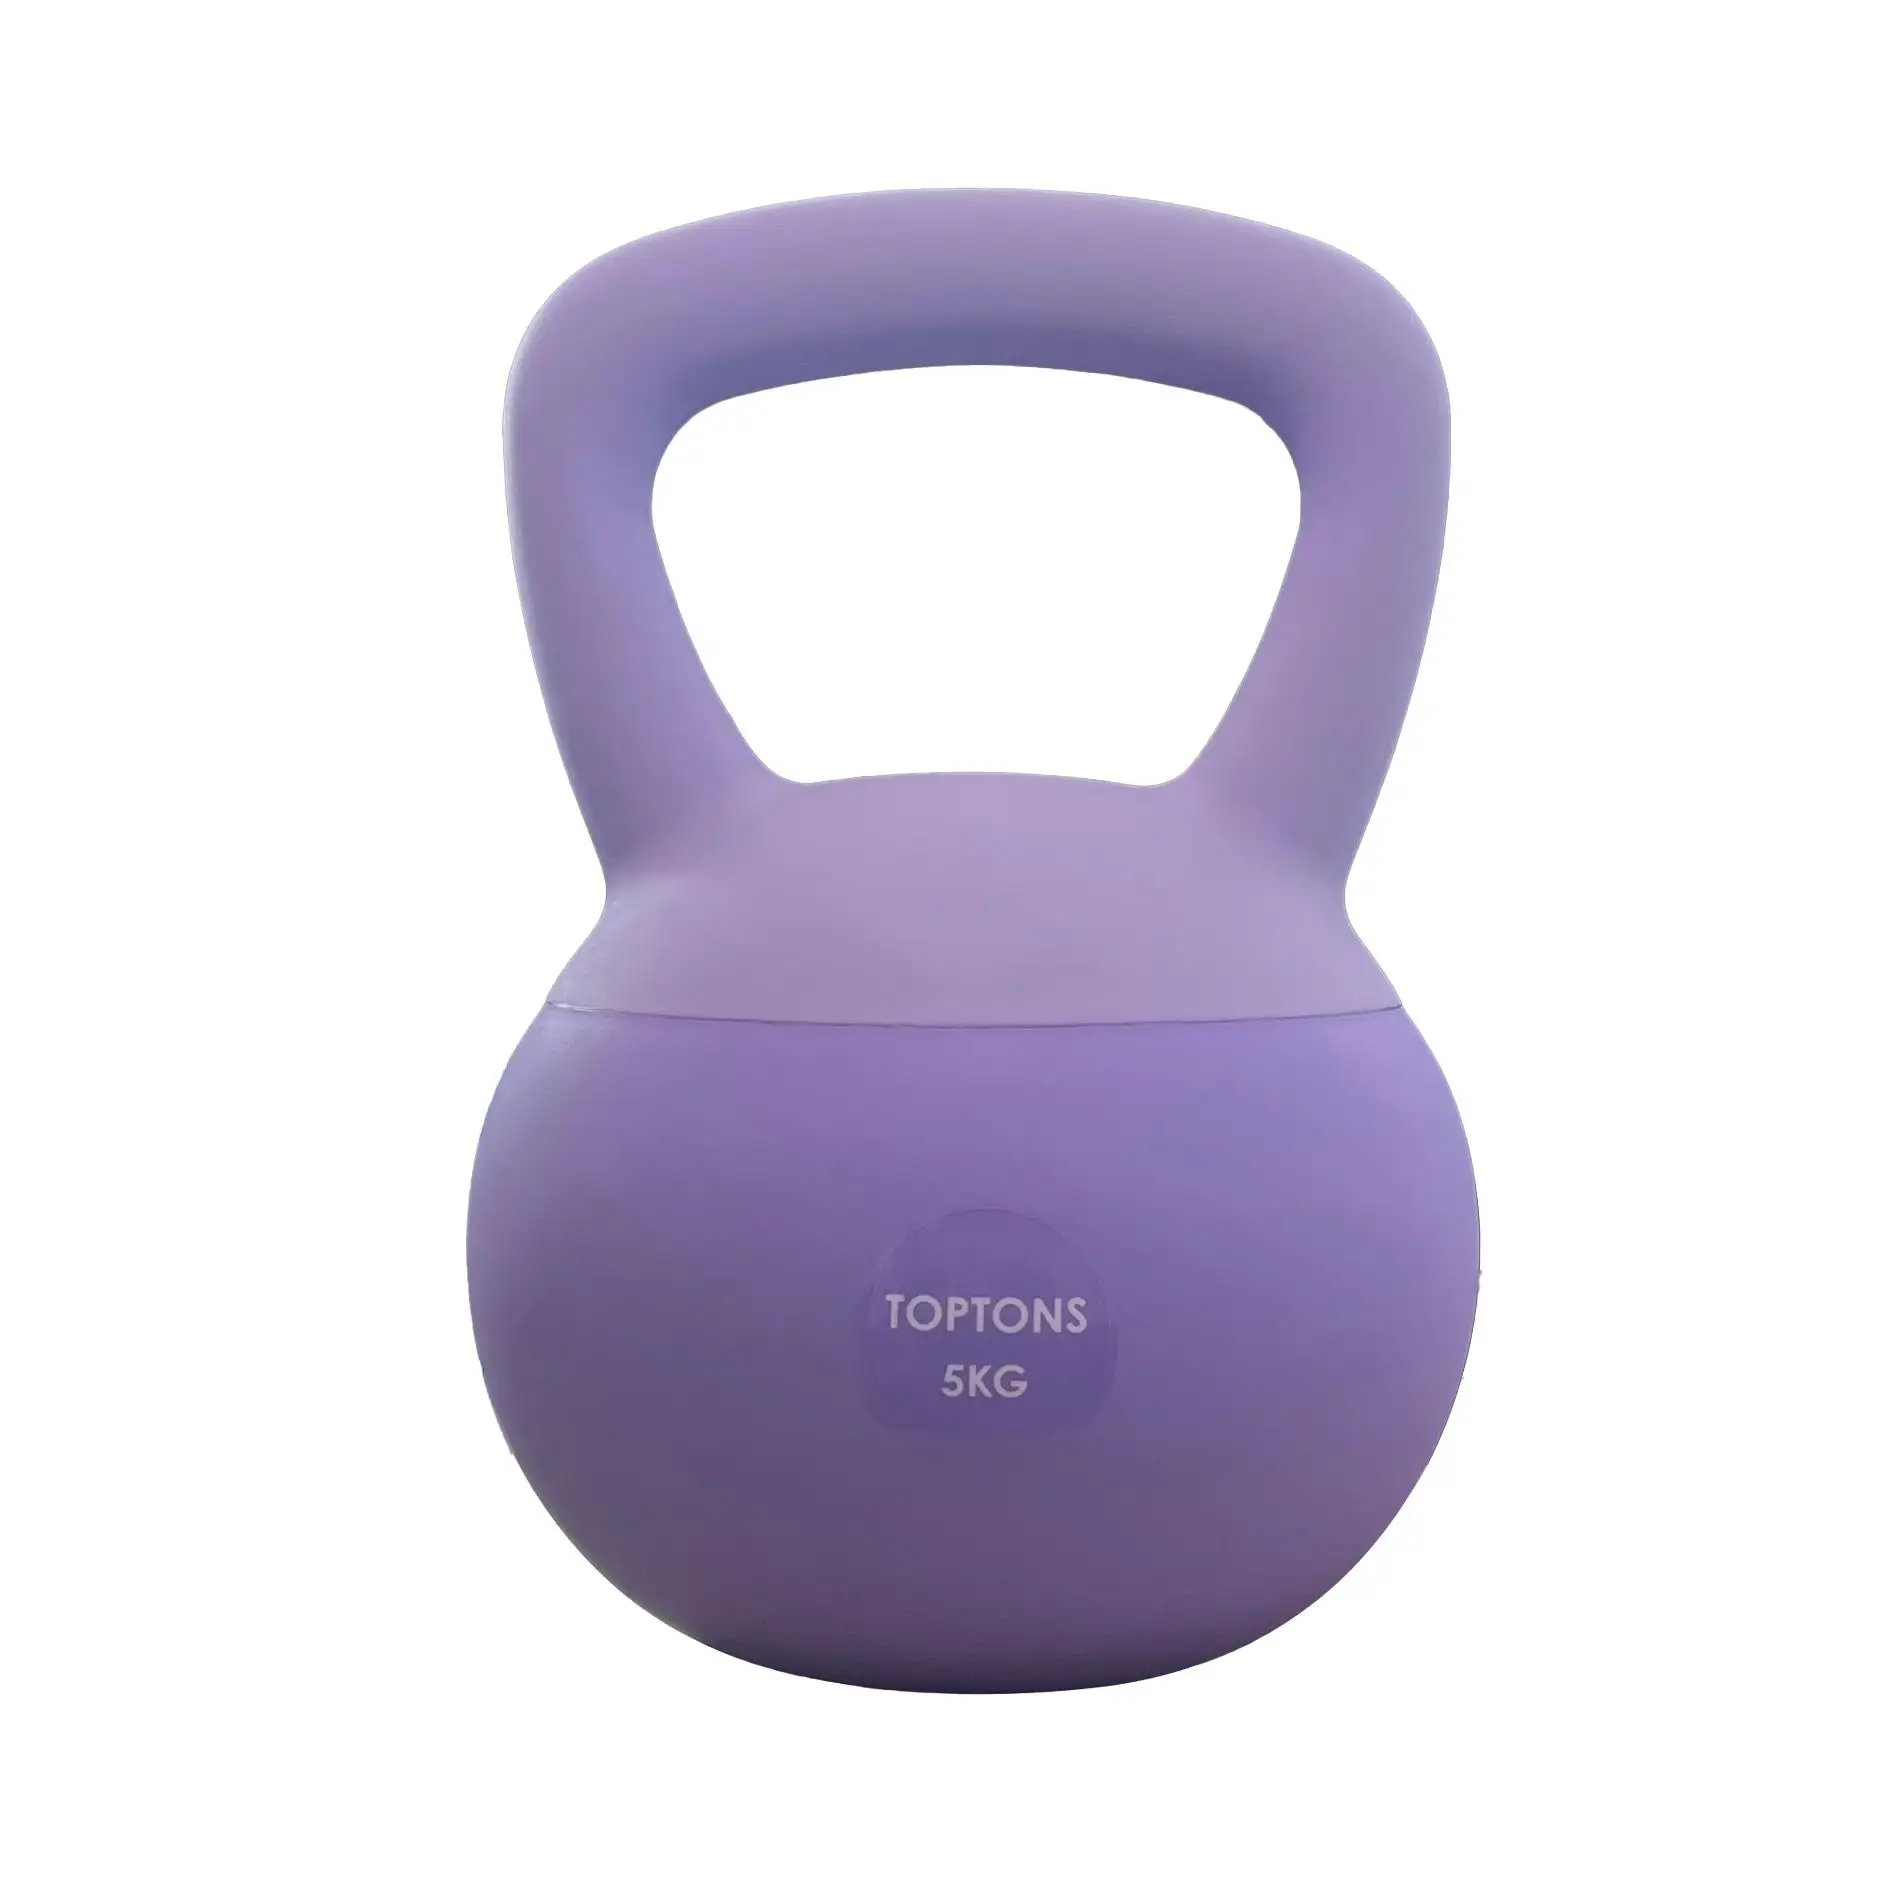 Top Quality Weightlifting Strength Core Training Safety Fitness Kettle Bell Pvc Soft Kettlebell Weights